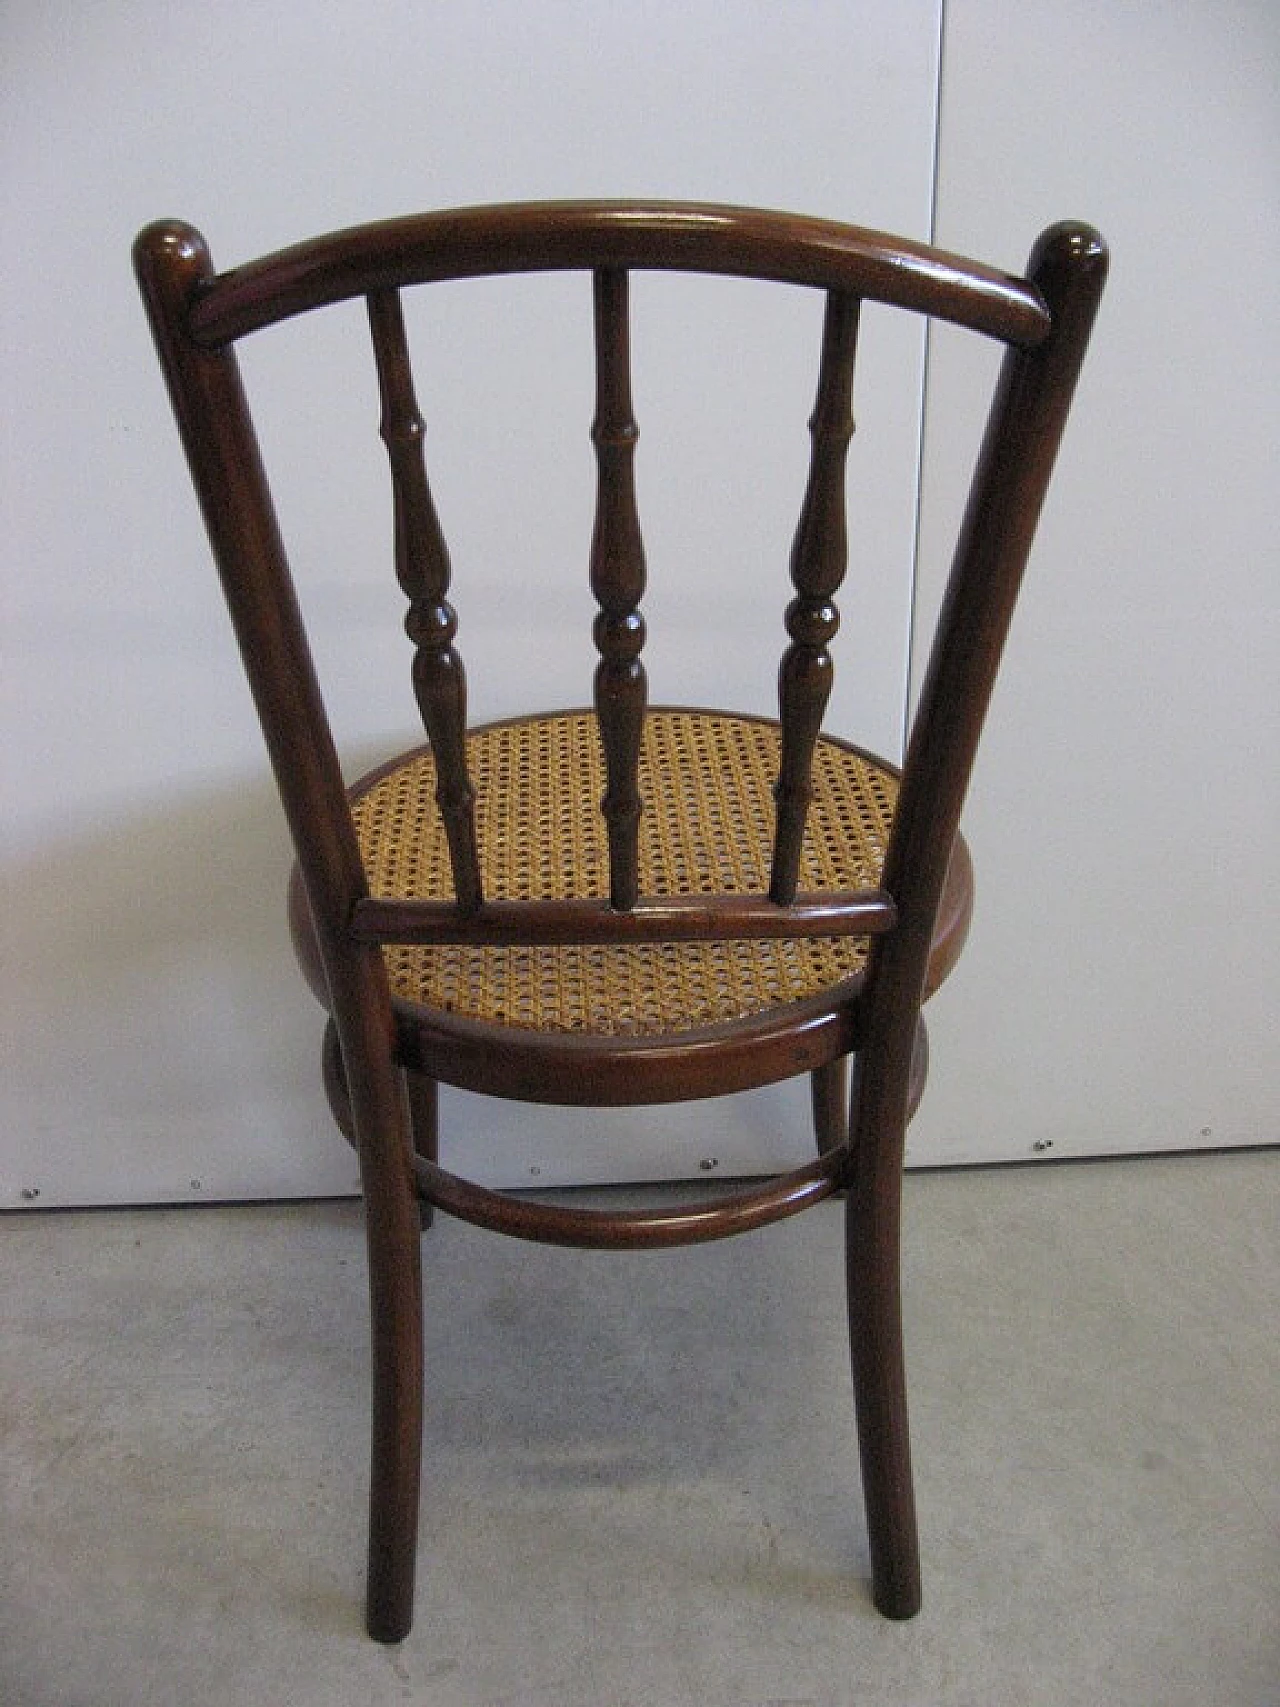 Series of 4 chairs marked with the brand J & J Kohn Wien Austria, beginning 20th century 1324144